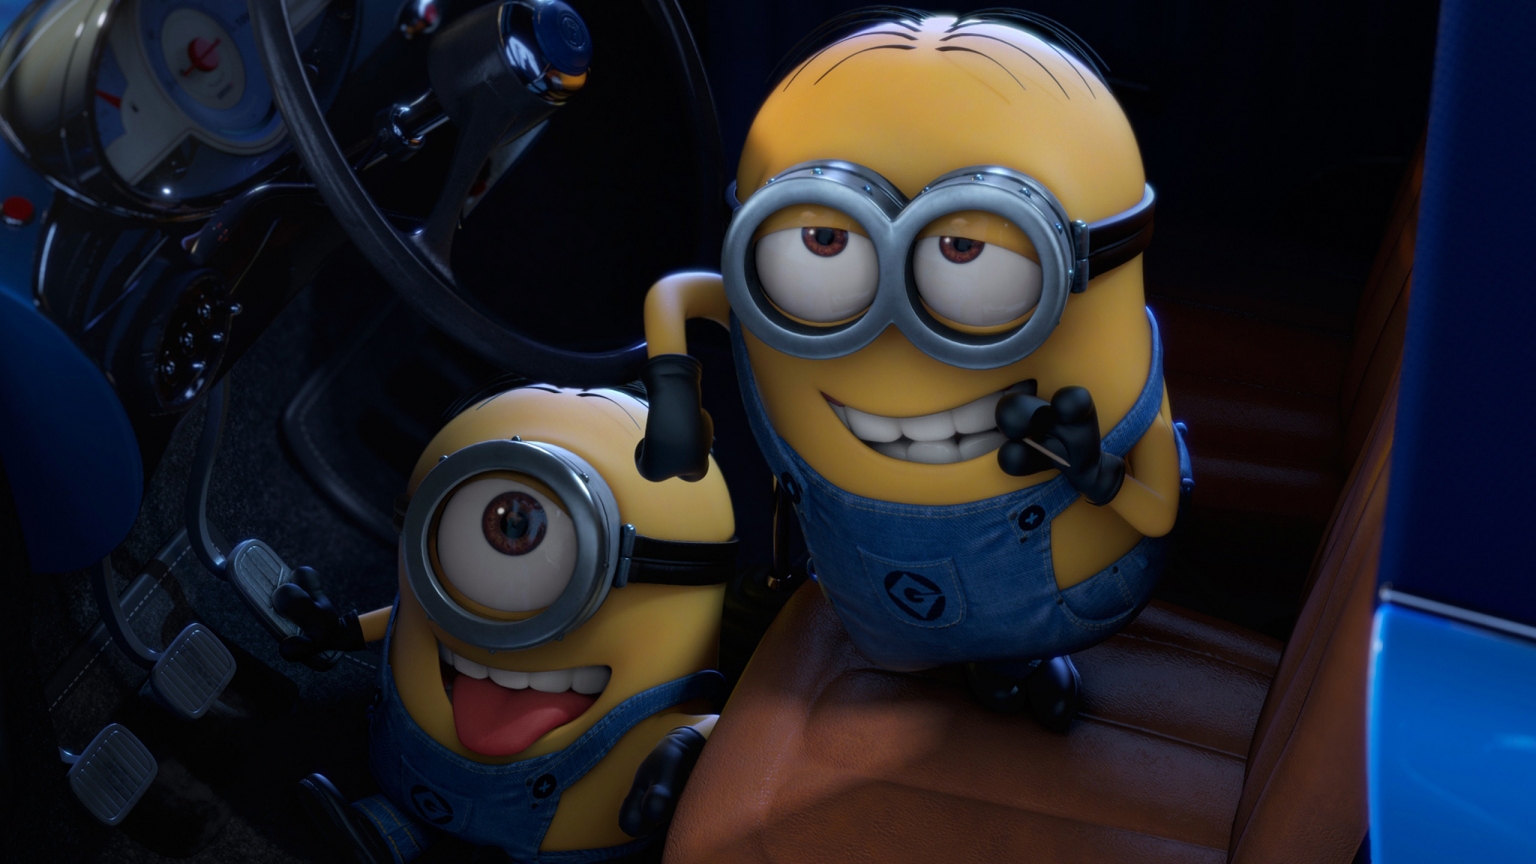 Minions for 1536 x 864 HDTV resolution